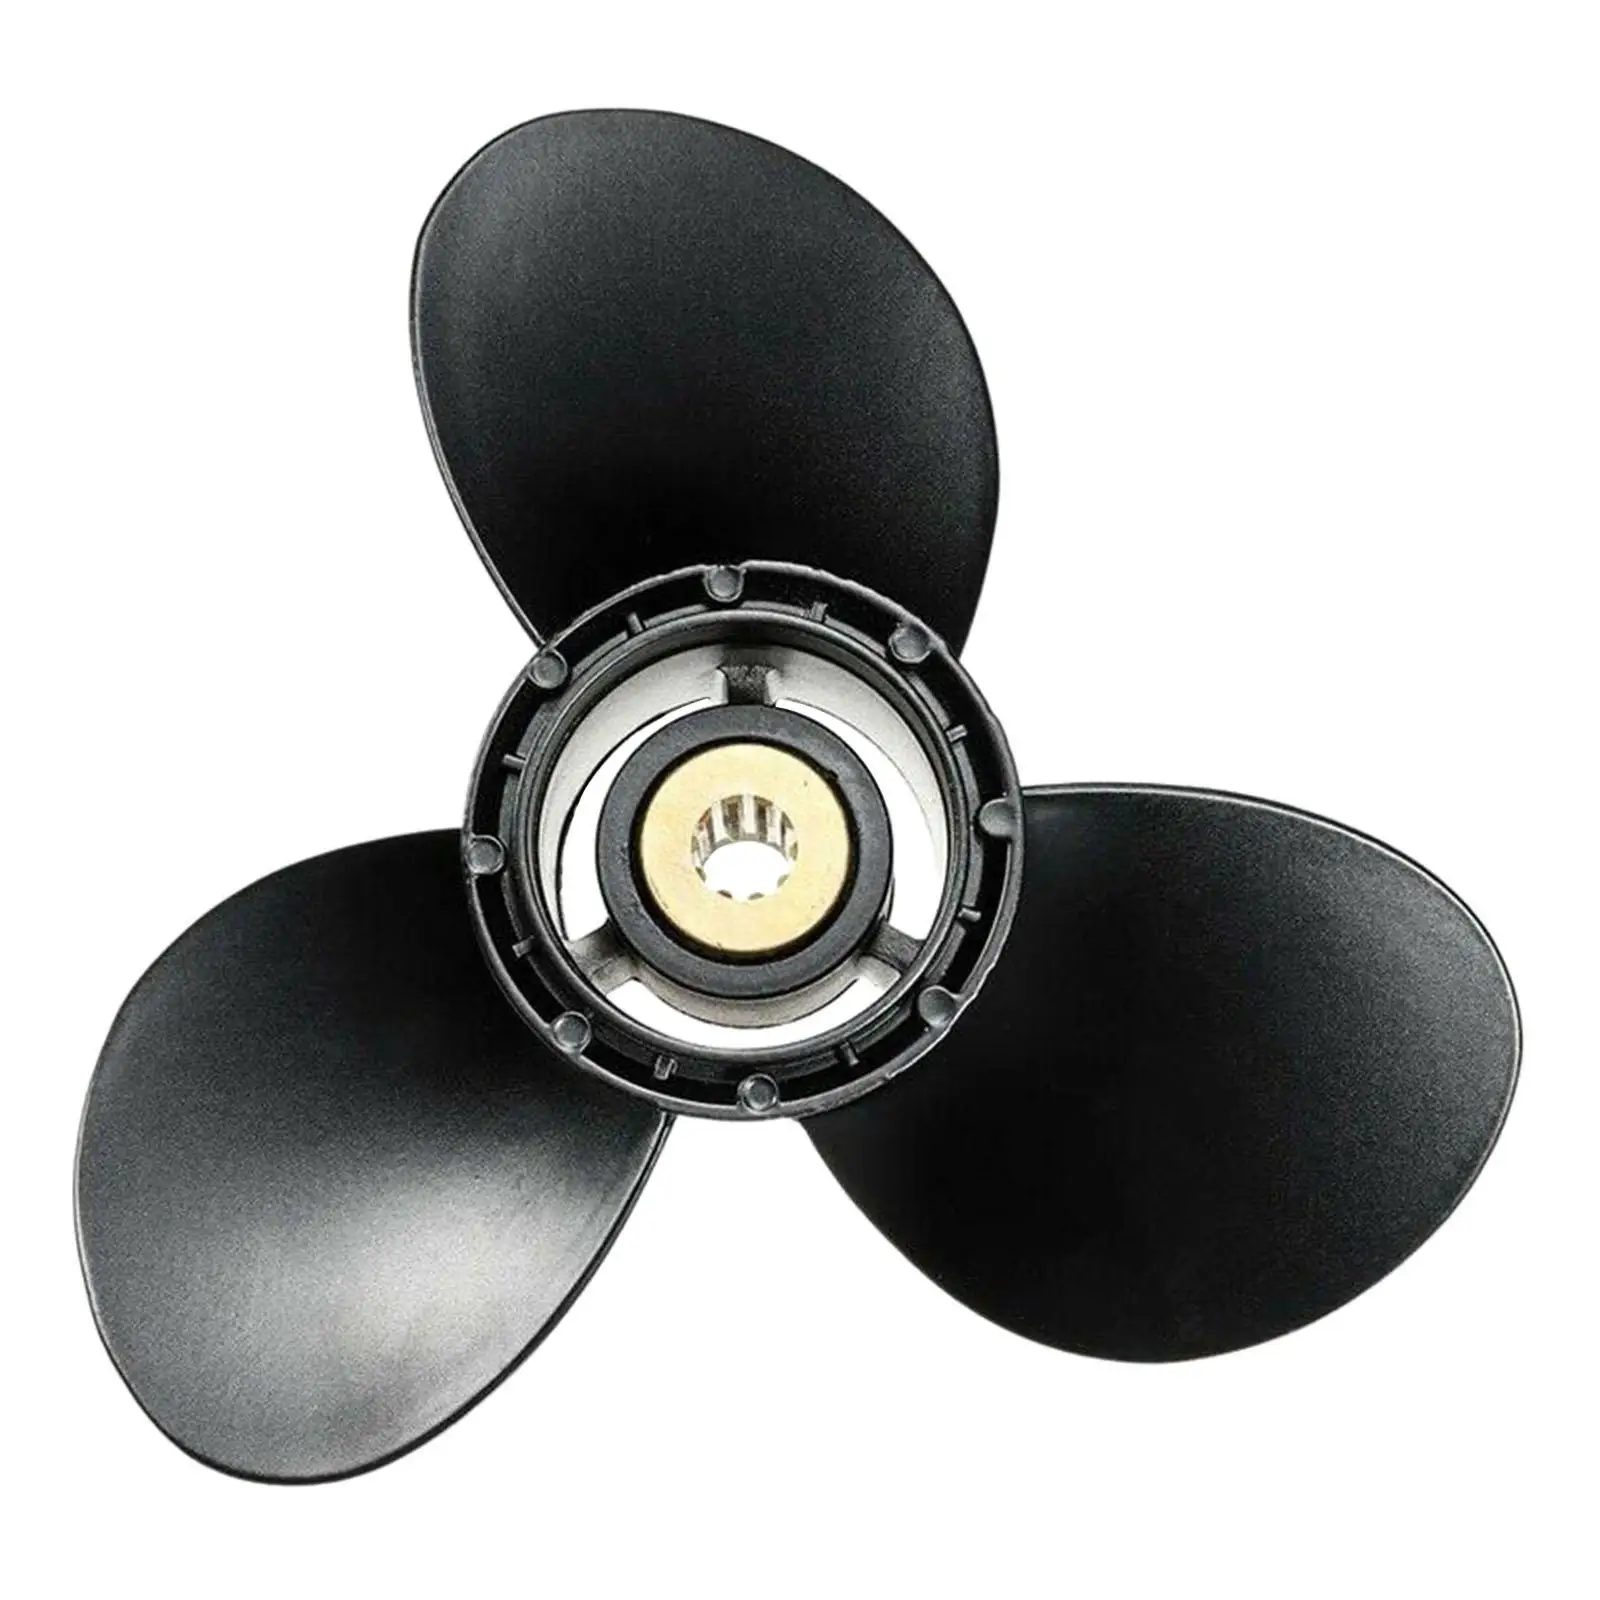 Outboard Propeller Replace Part Fit for Evinrude Johnson Outboard Engines